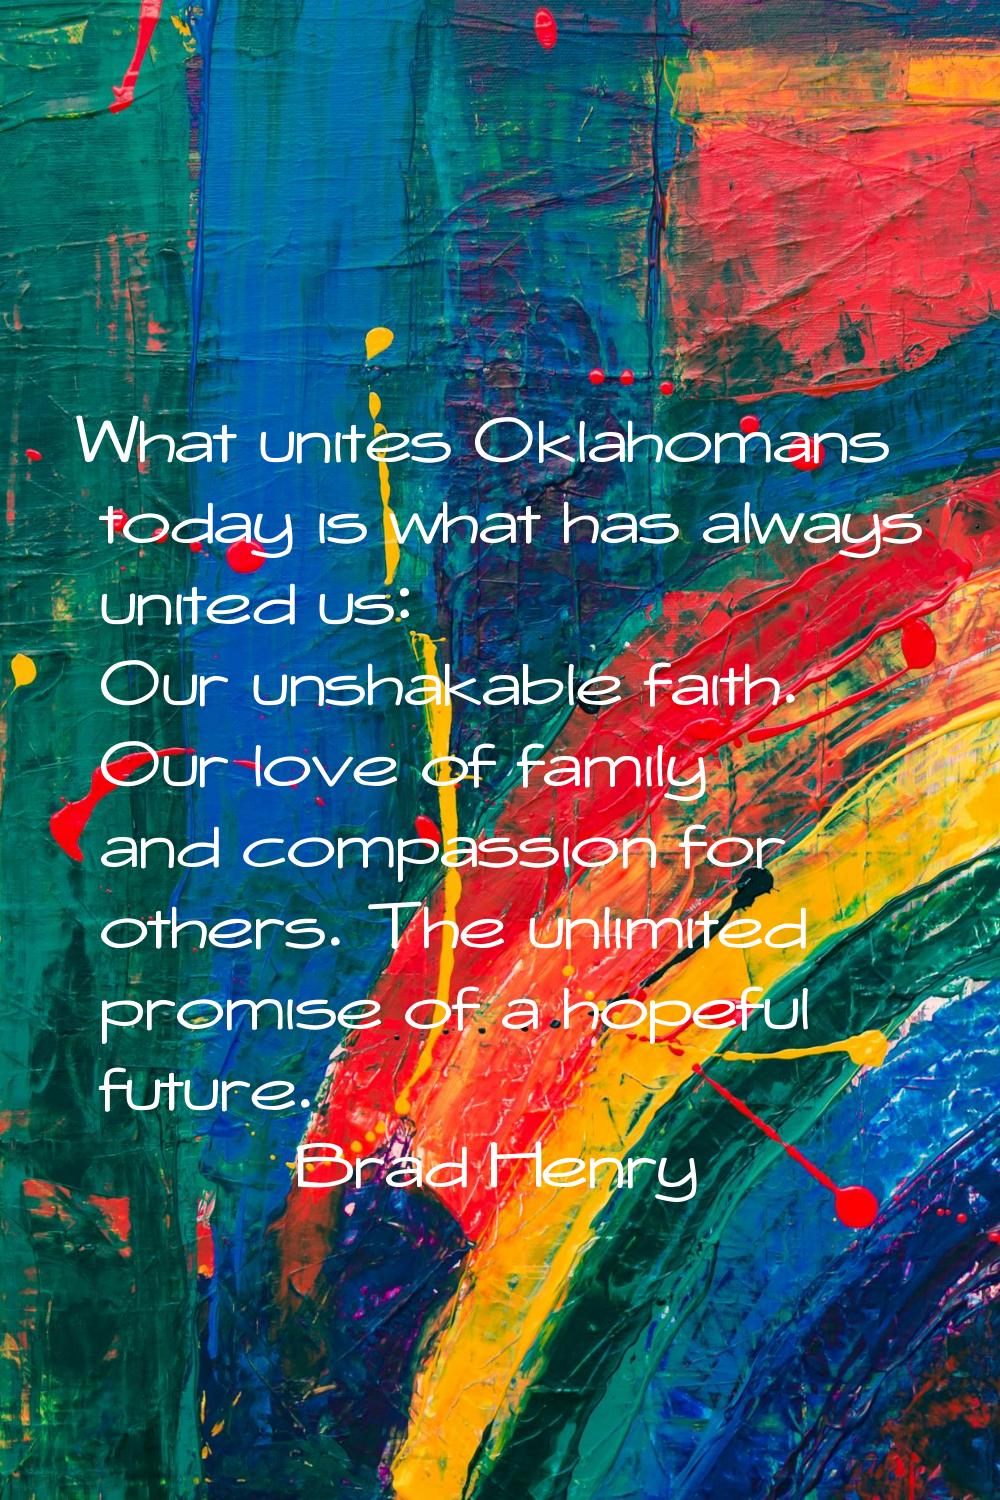 What unites Oklahomans today is what has always united us: Our unshakable faith. Our love of family